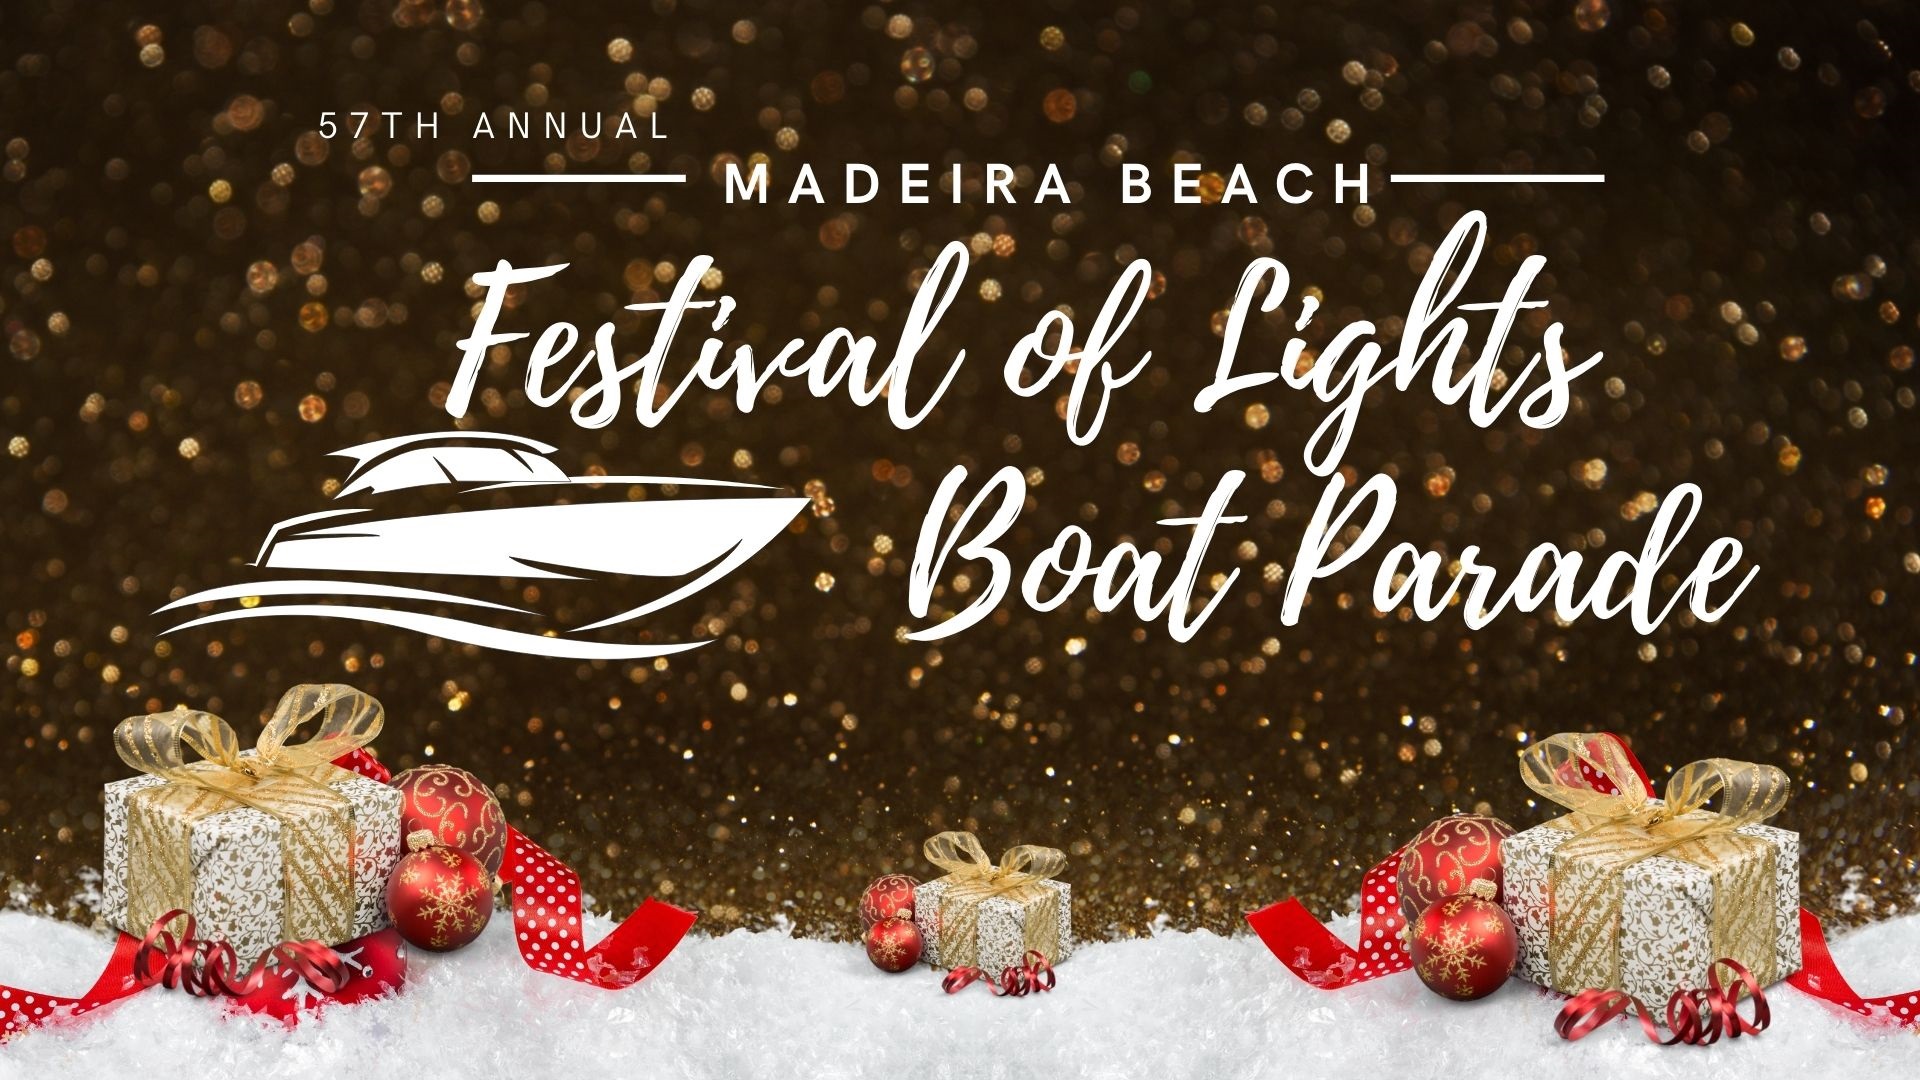 57th Annual Madeira Beach Festival of Lights Holiday Boat Parade cover image